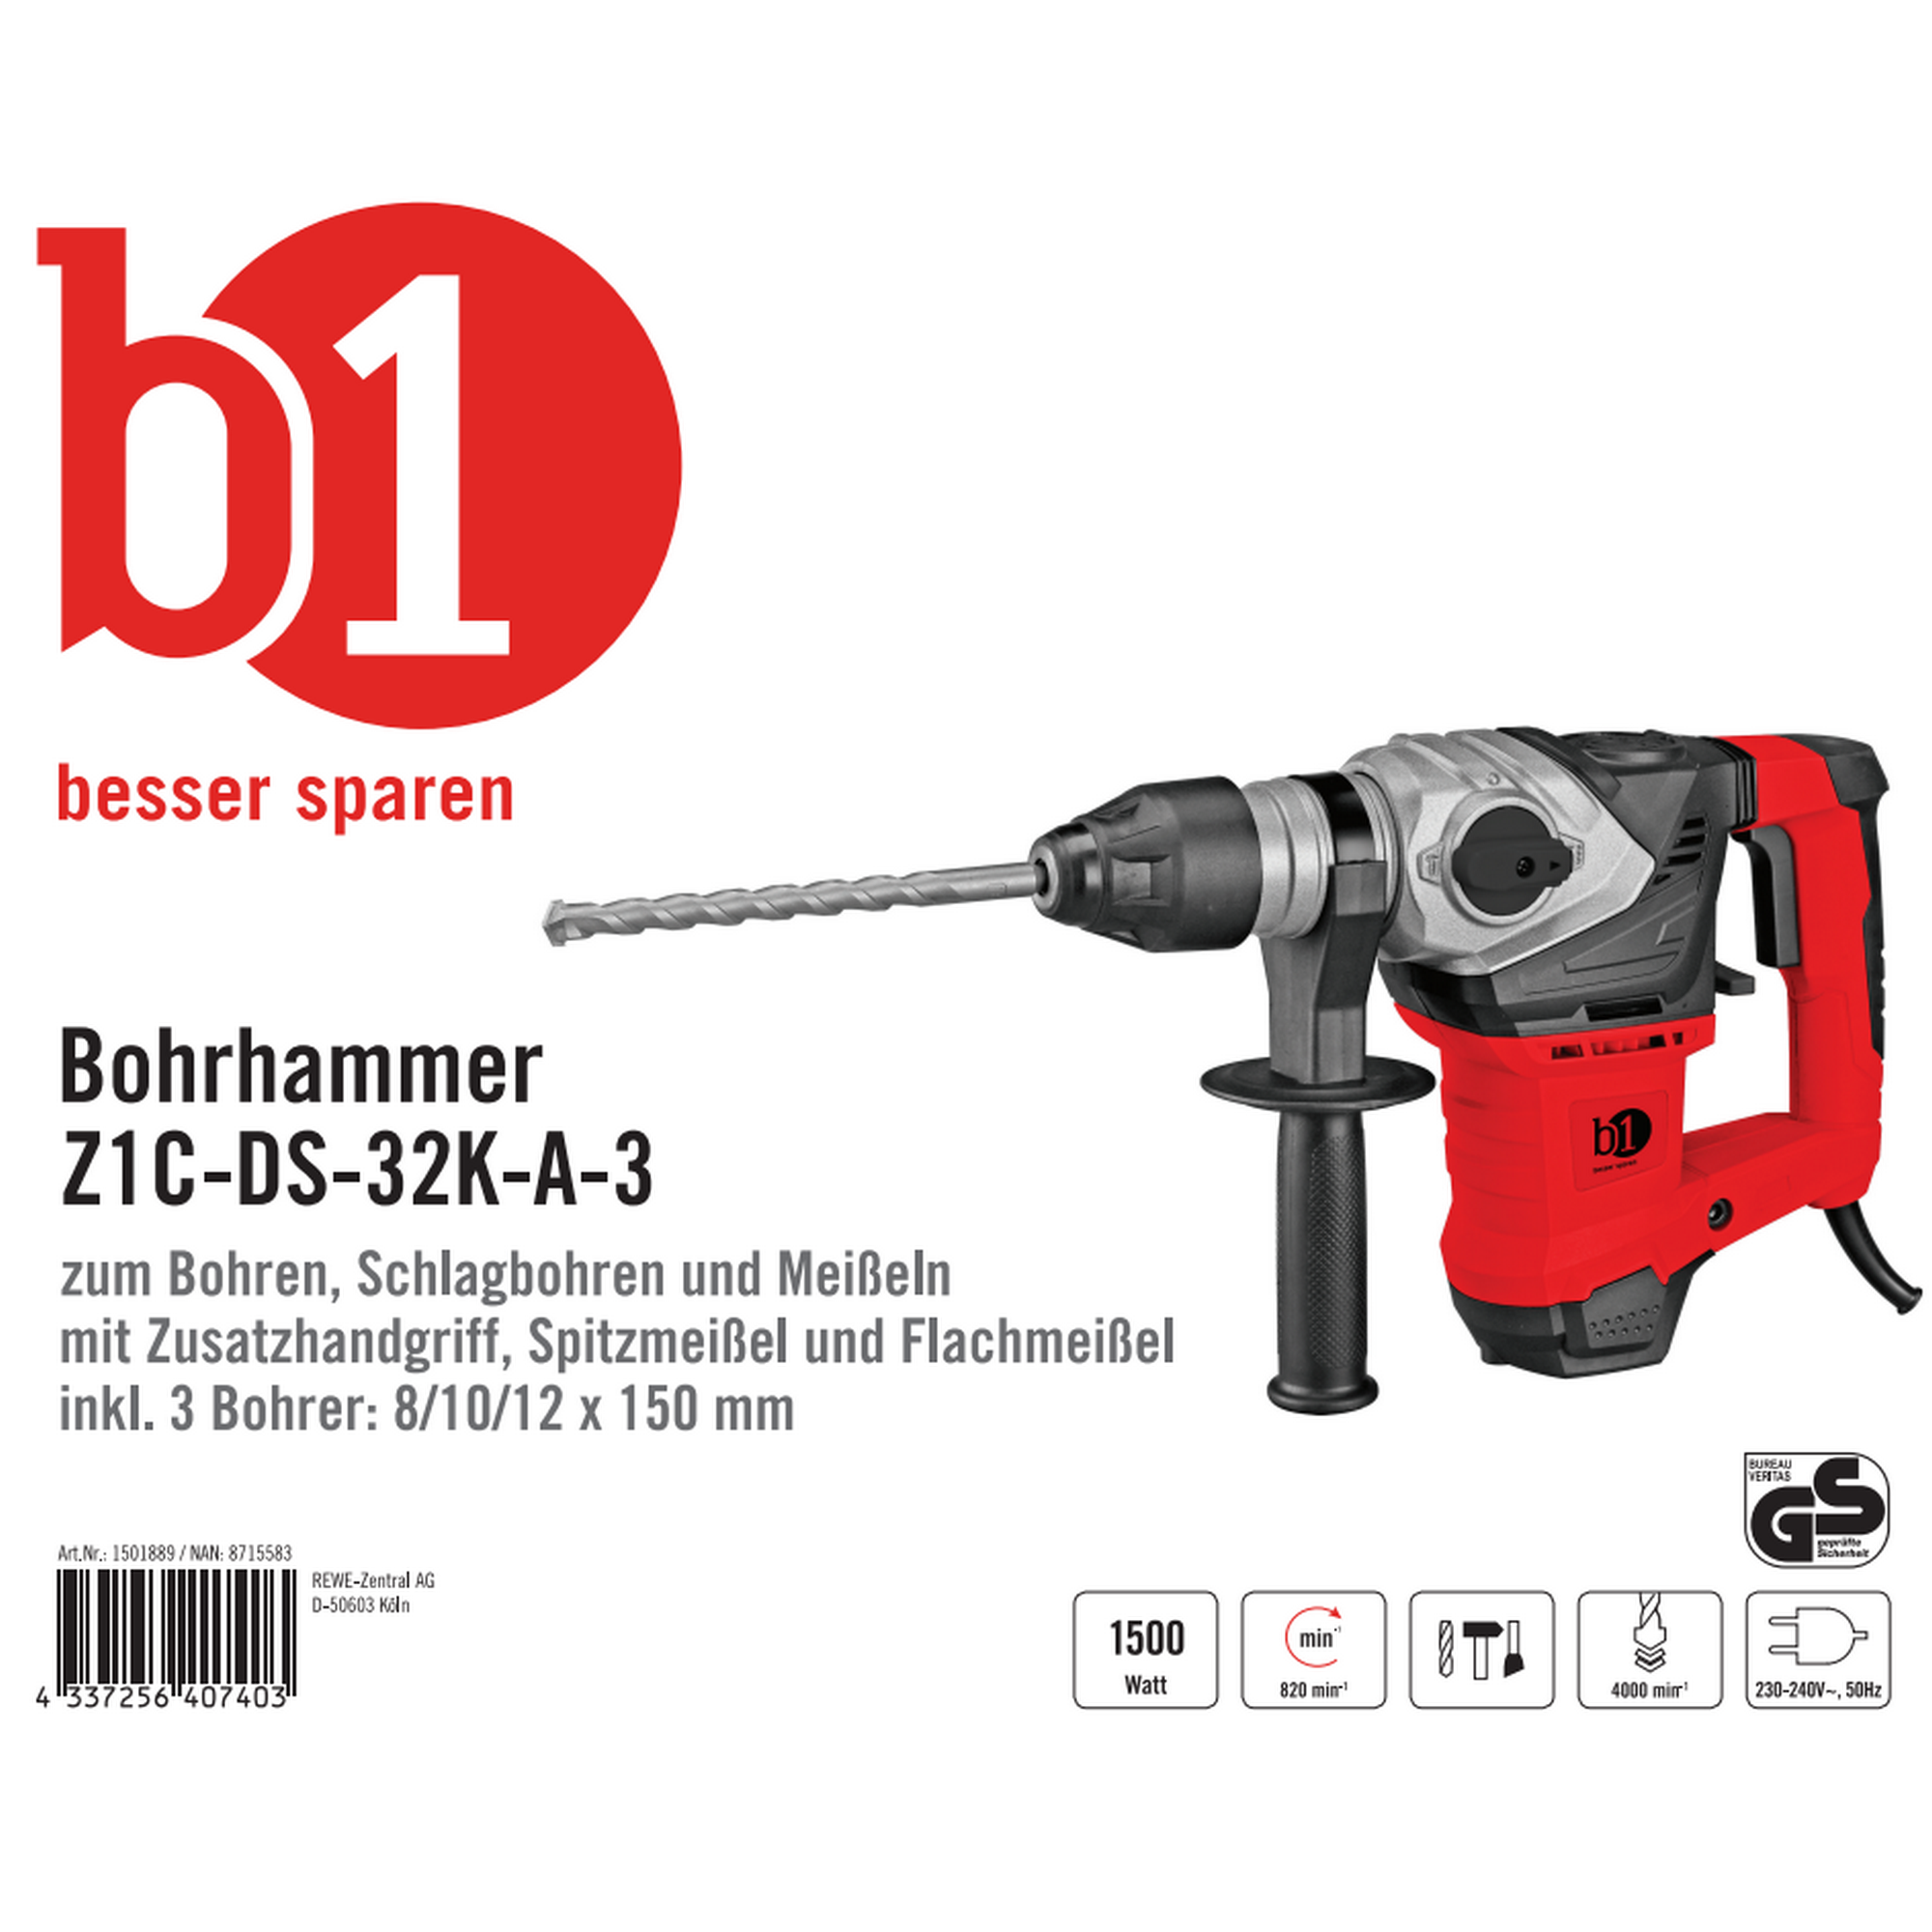 Bohrhammer 'Z1C-DS-32K-A-3' 1500 W + product picture